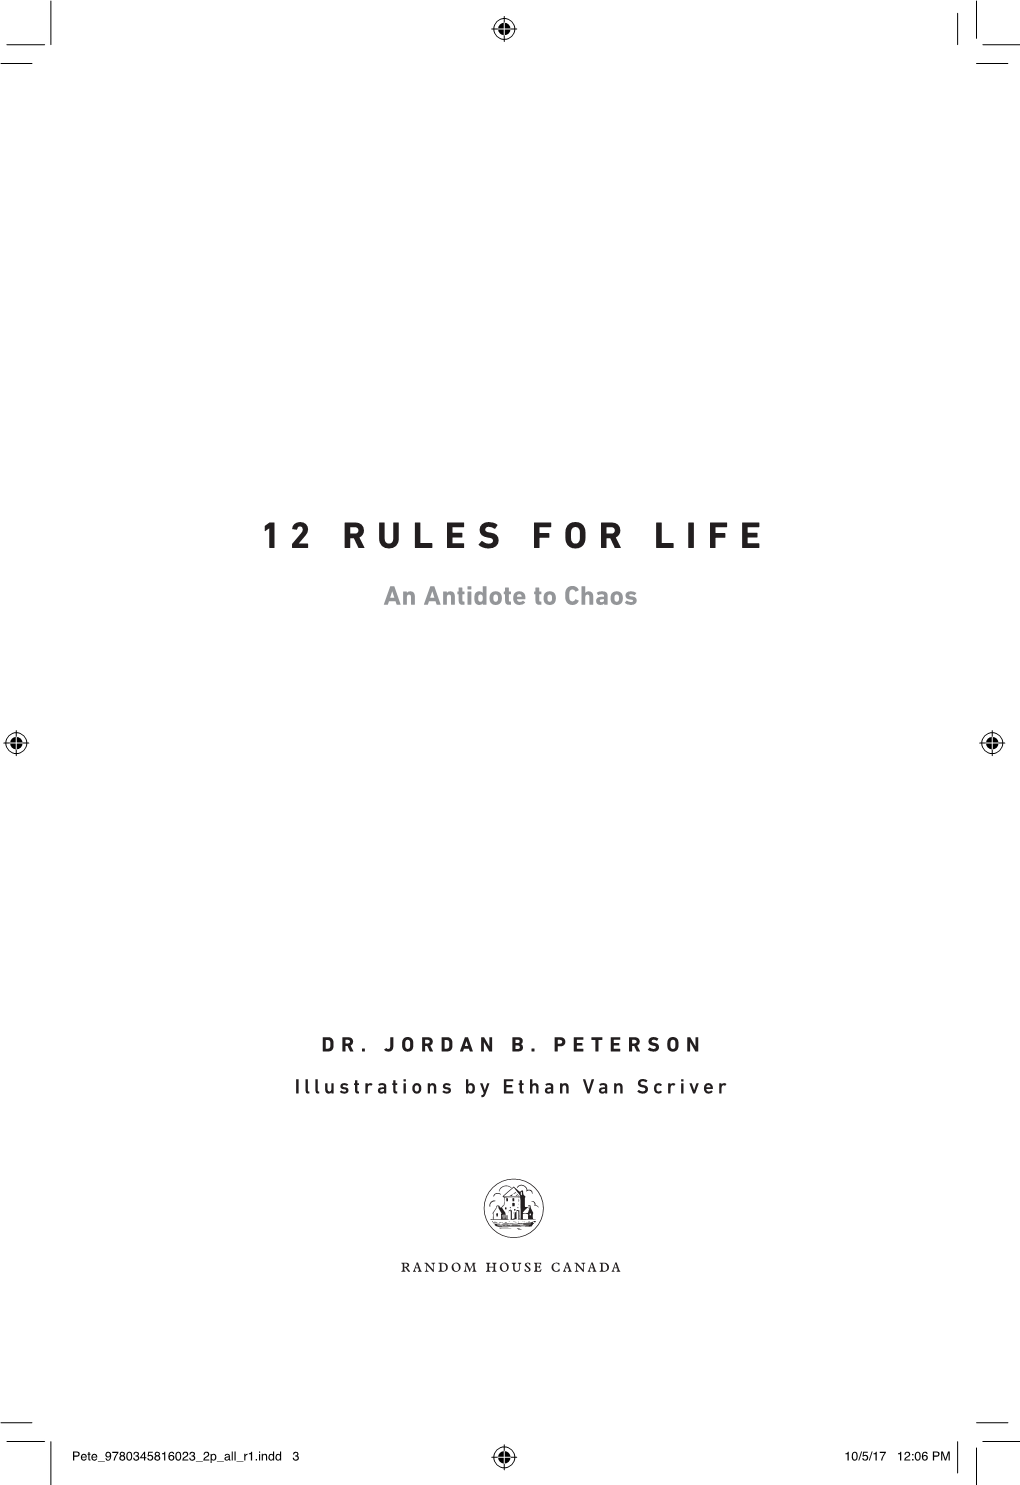 An Extract from 12 Rules for Life